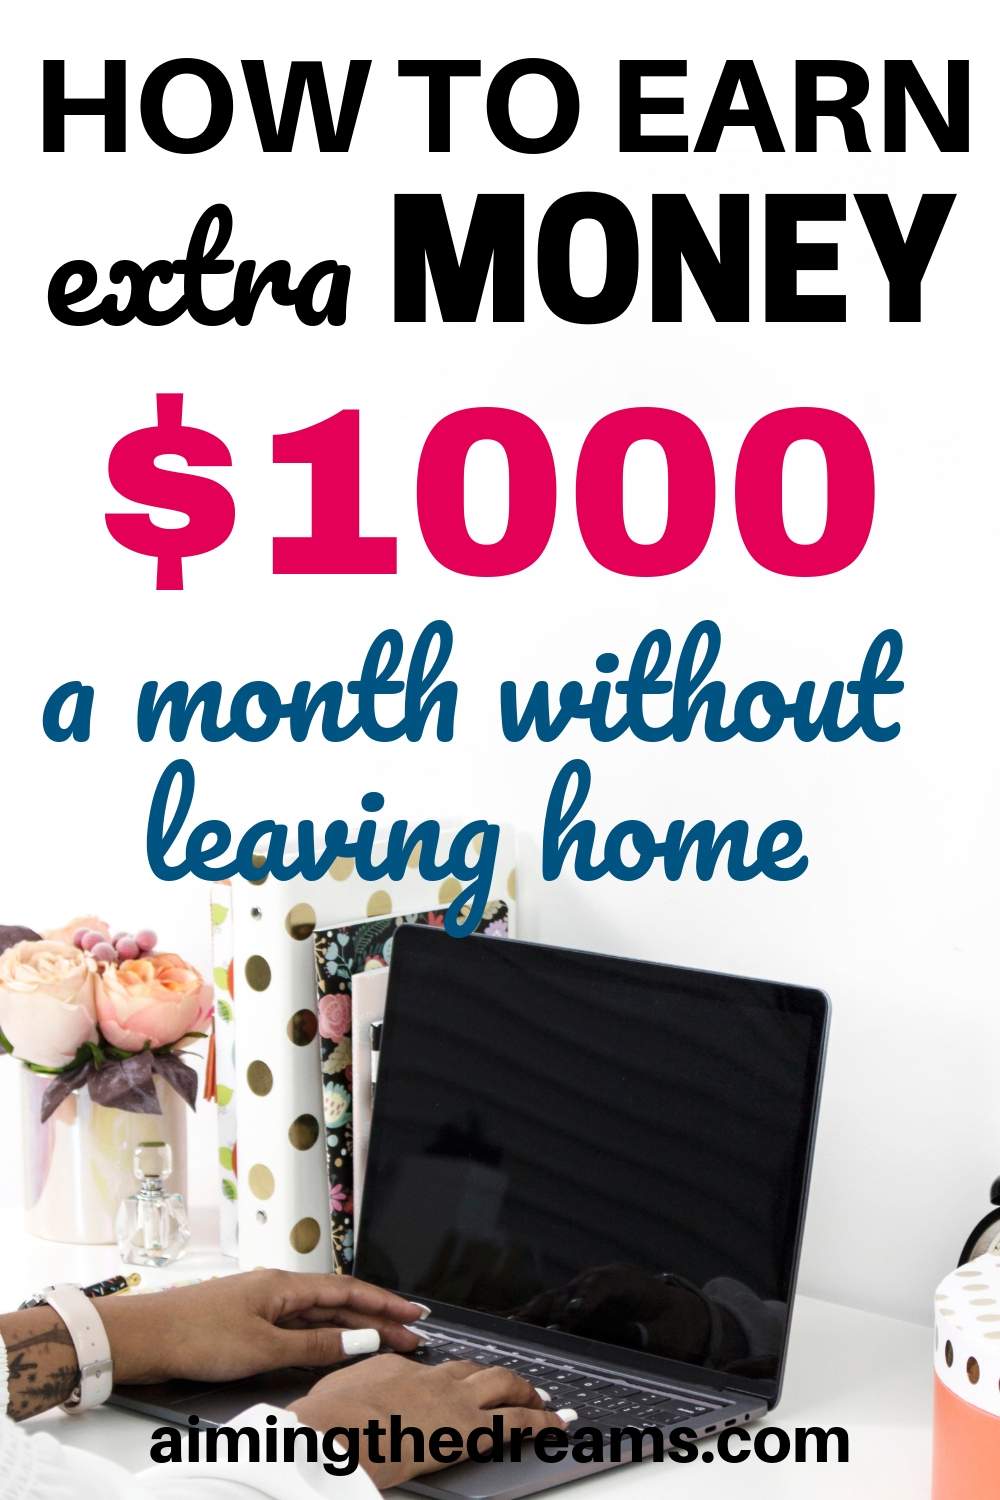 How to earn extra money $1000 a month without leaving home.